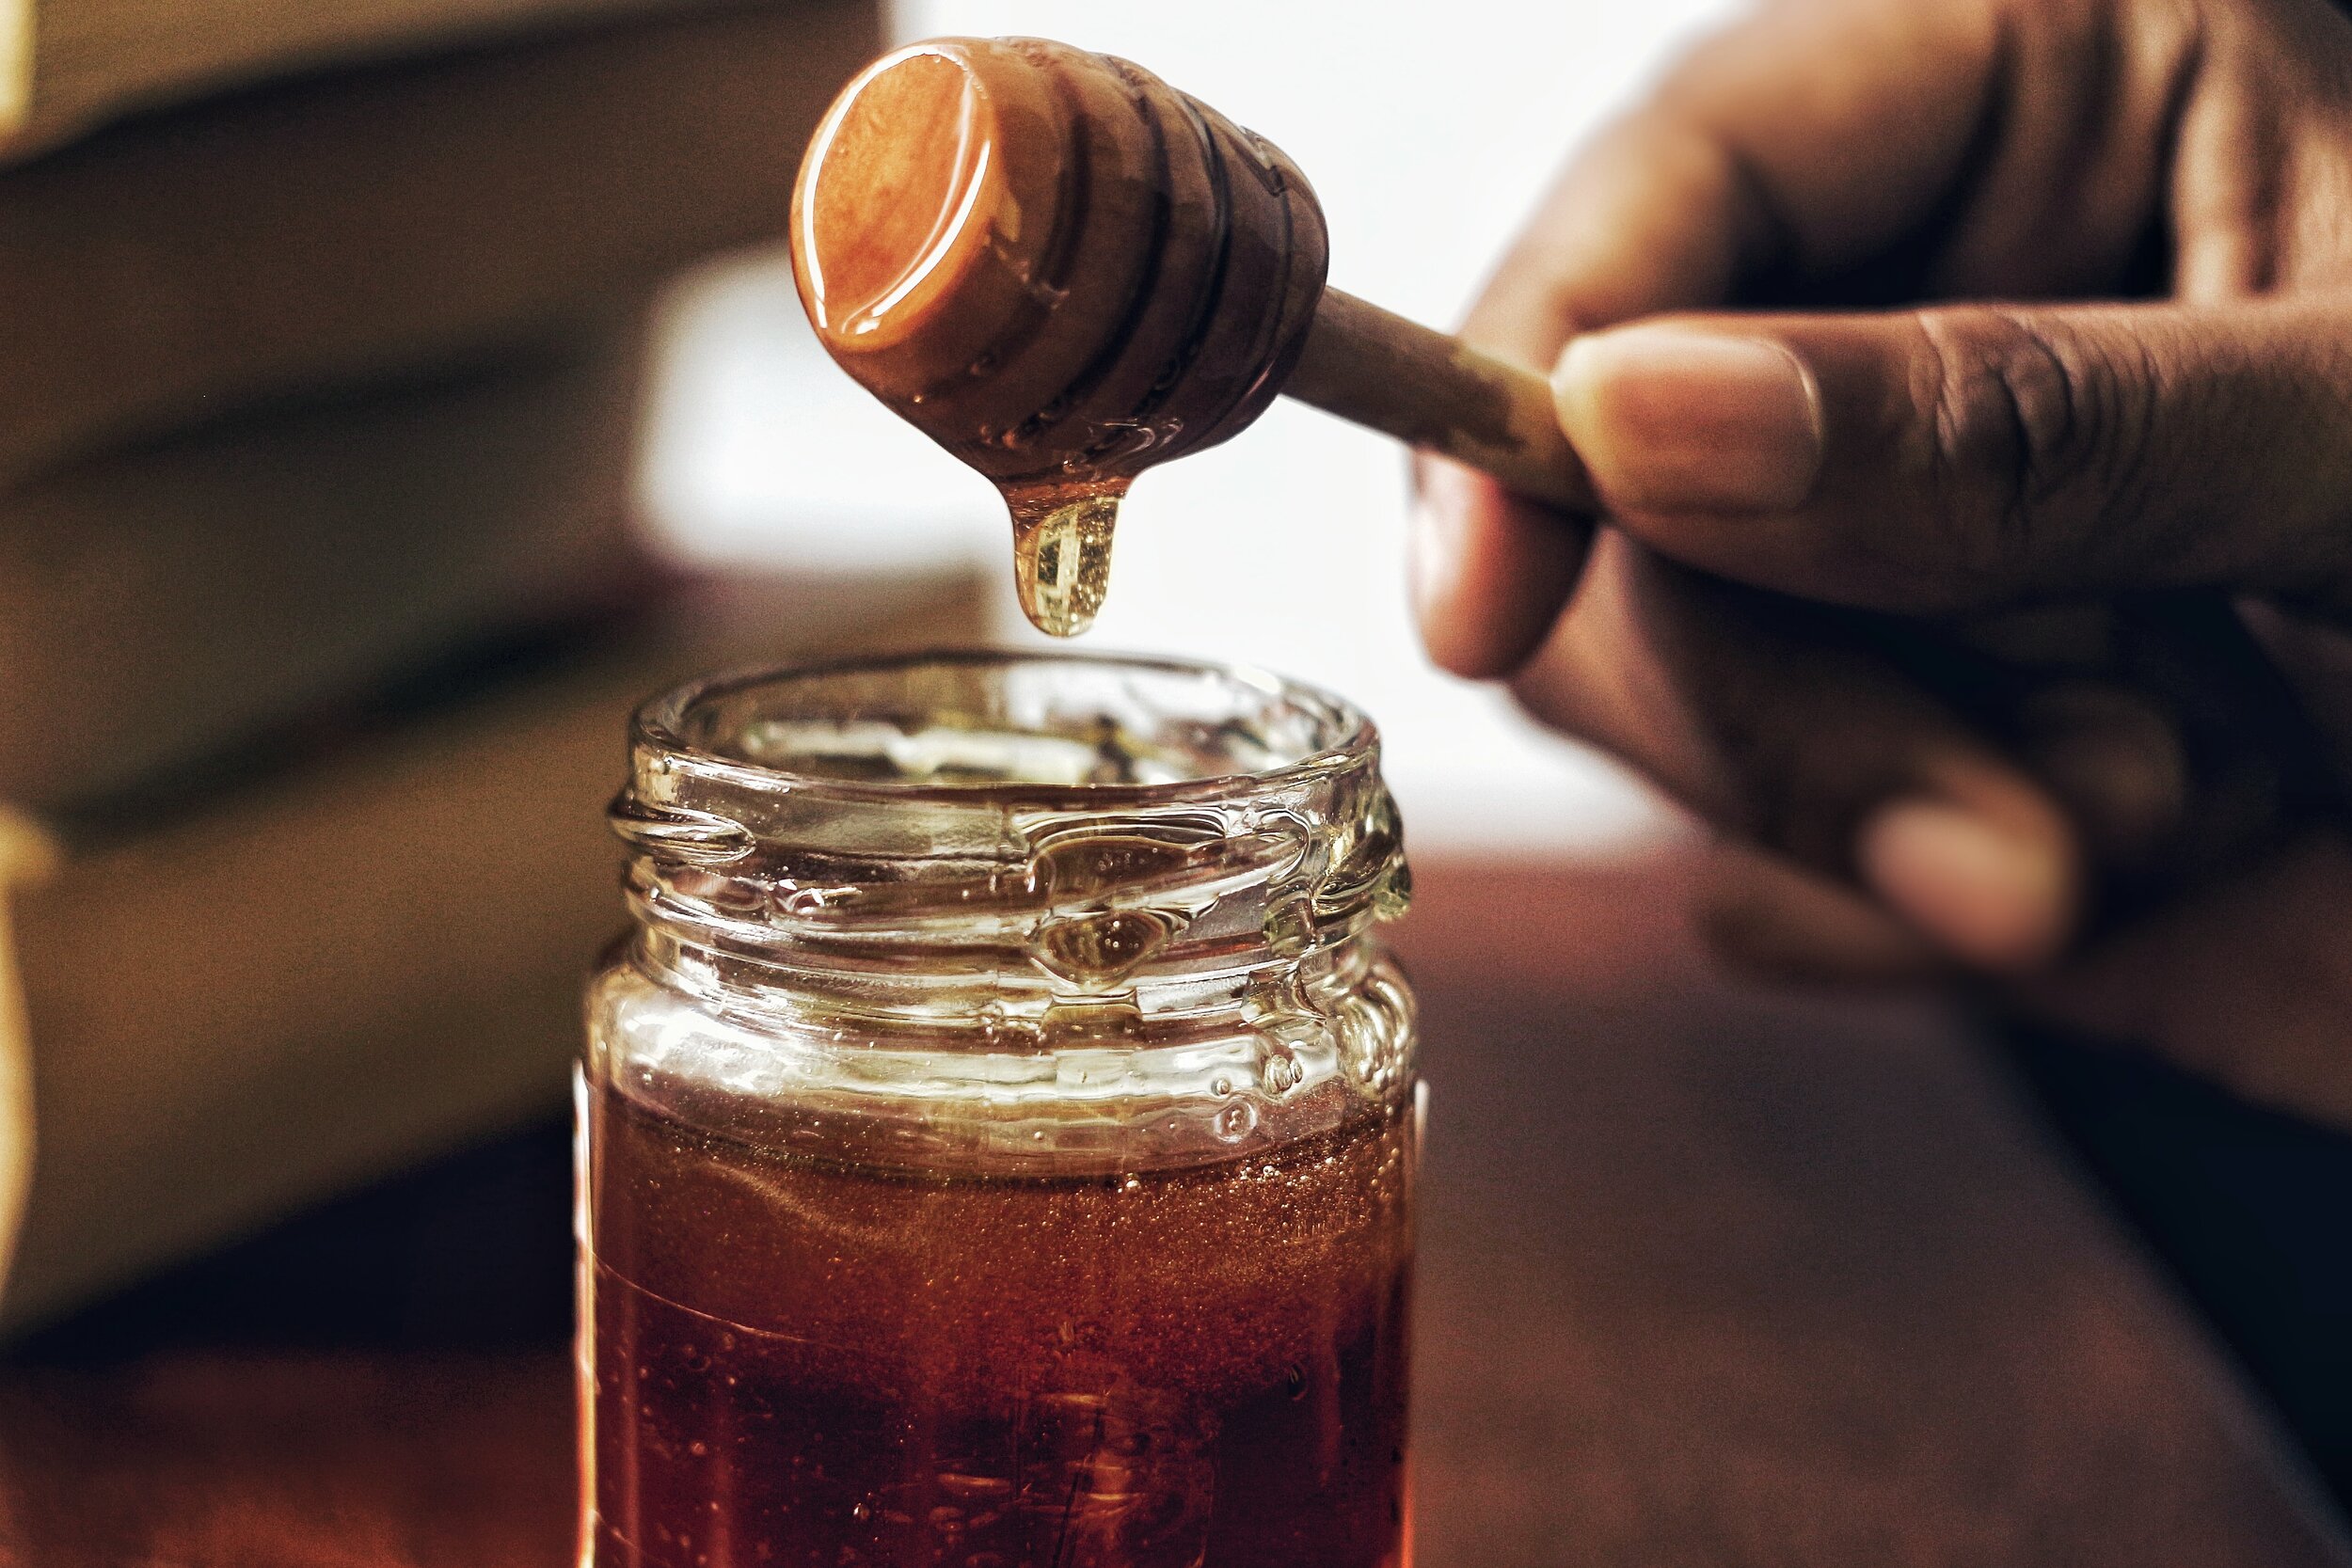 Honey dripping from a jar